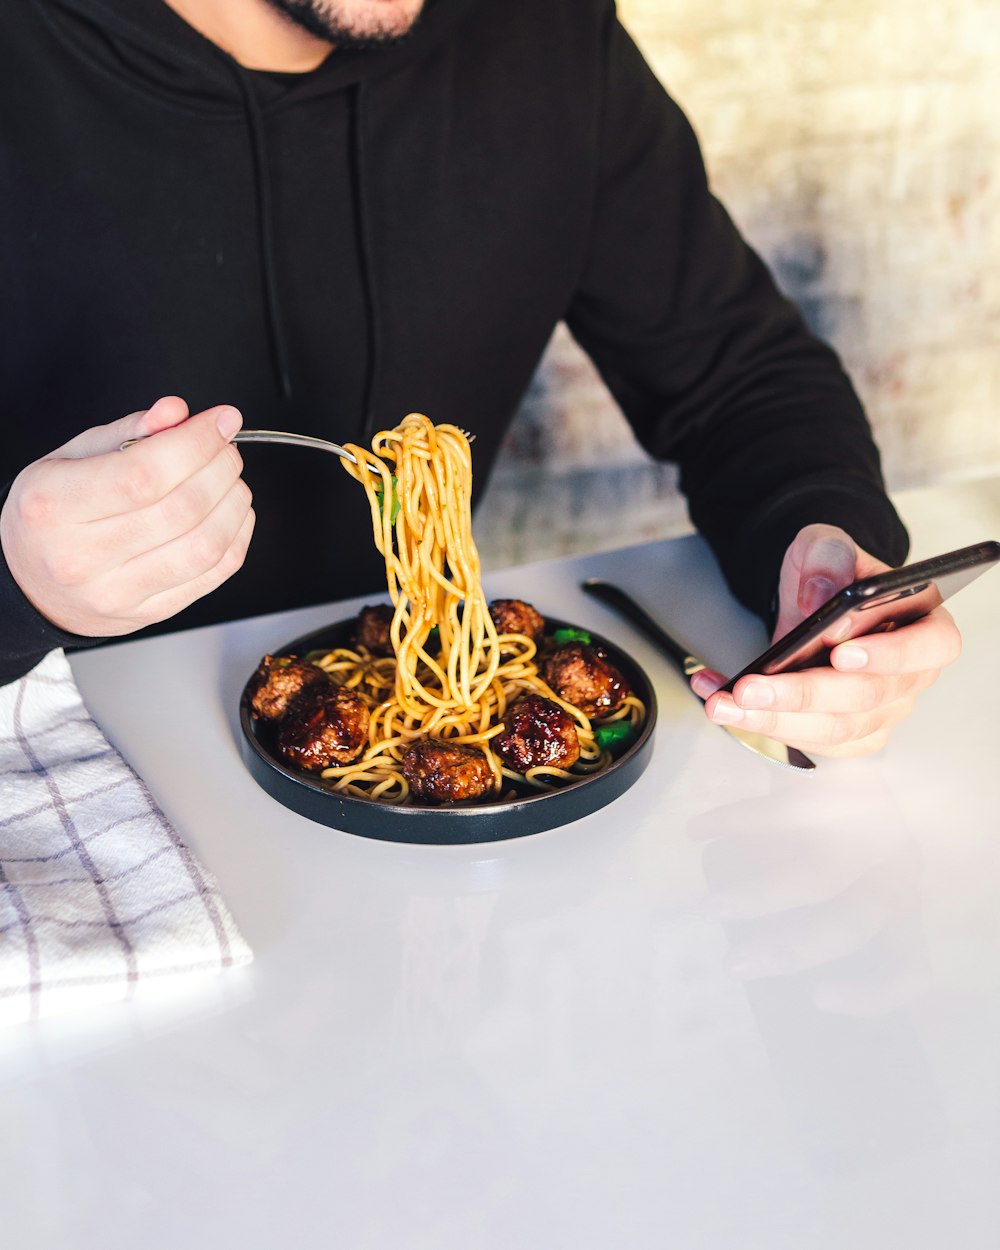 man eating cooked noodle while using phone